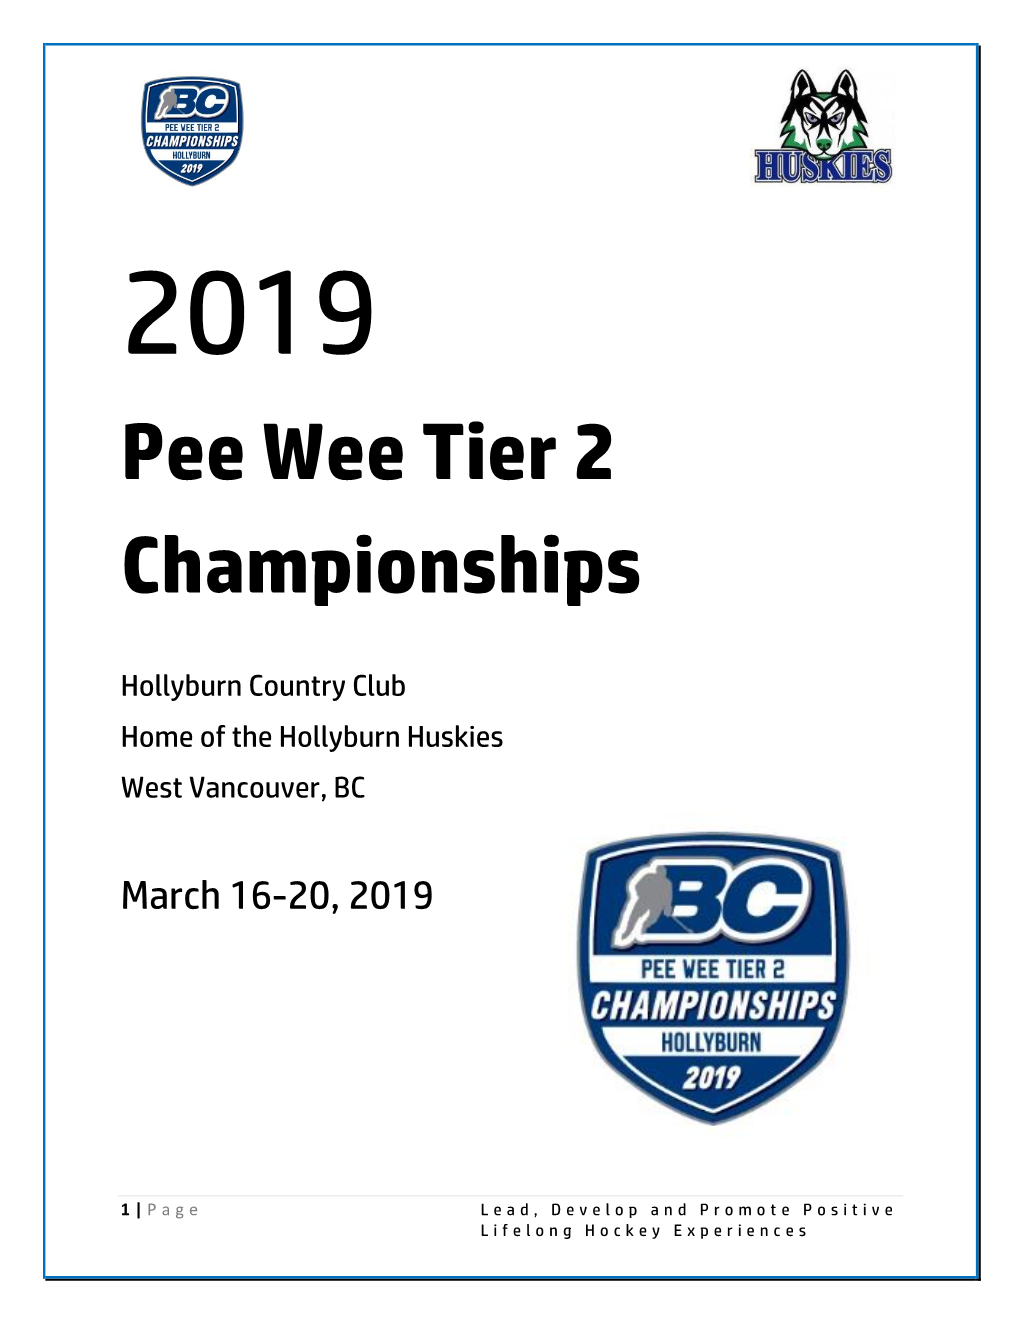 Pee Wee Tier 2 Championships